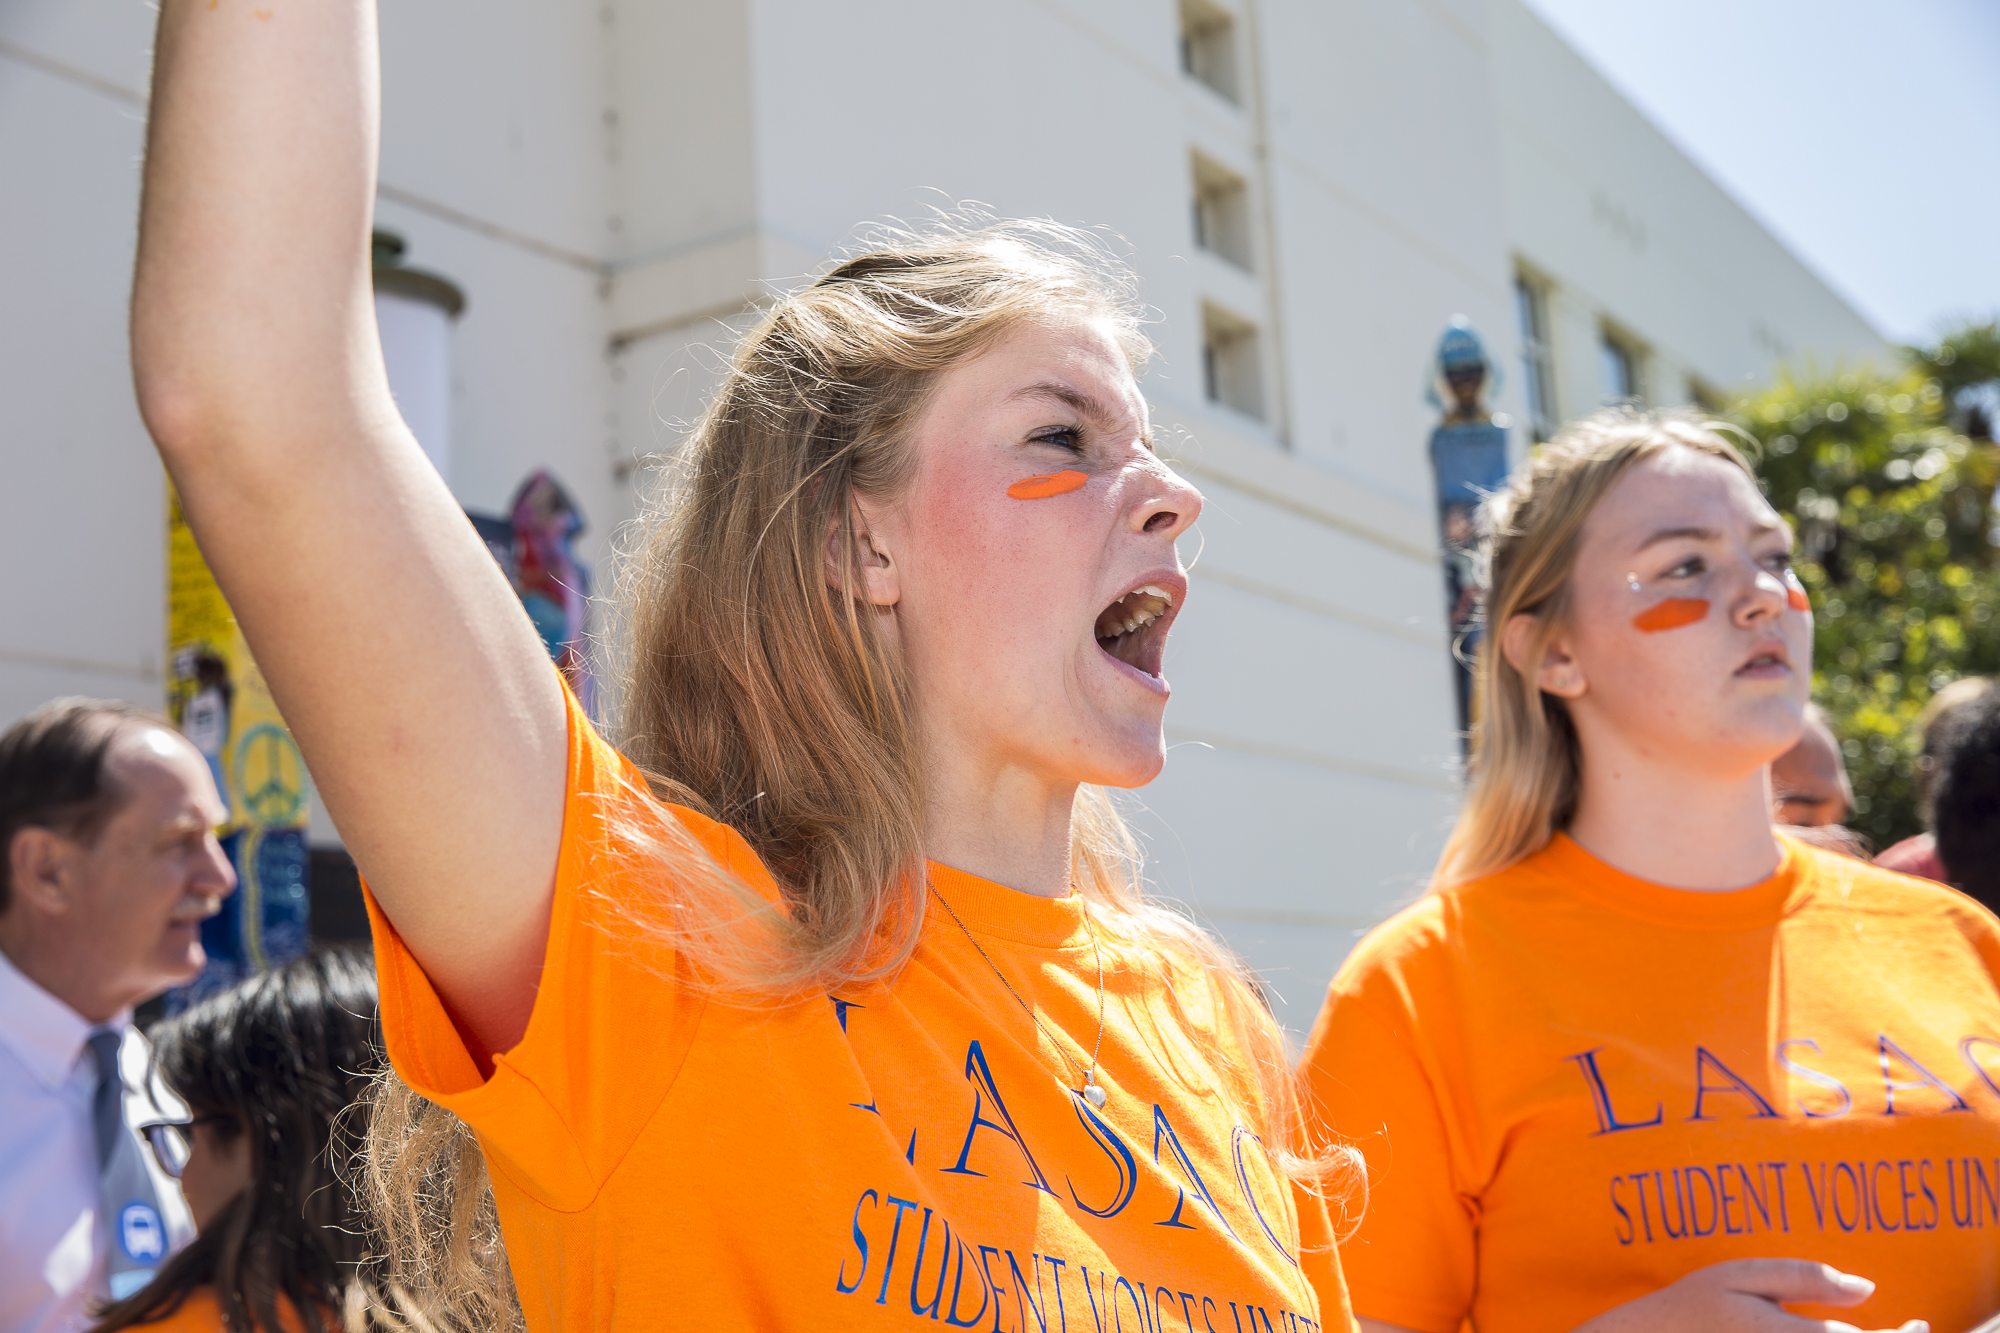  Santa Monica High students Siri Storstein (left) and Camille Hannant (right) start chanting during the student walkout that converged at Santa Monica City Hall in Santa Monica California, on Friday, April 20 2018. Several hundred students from area 